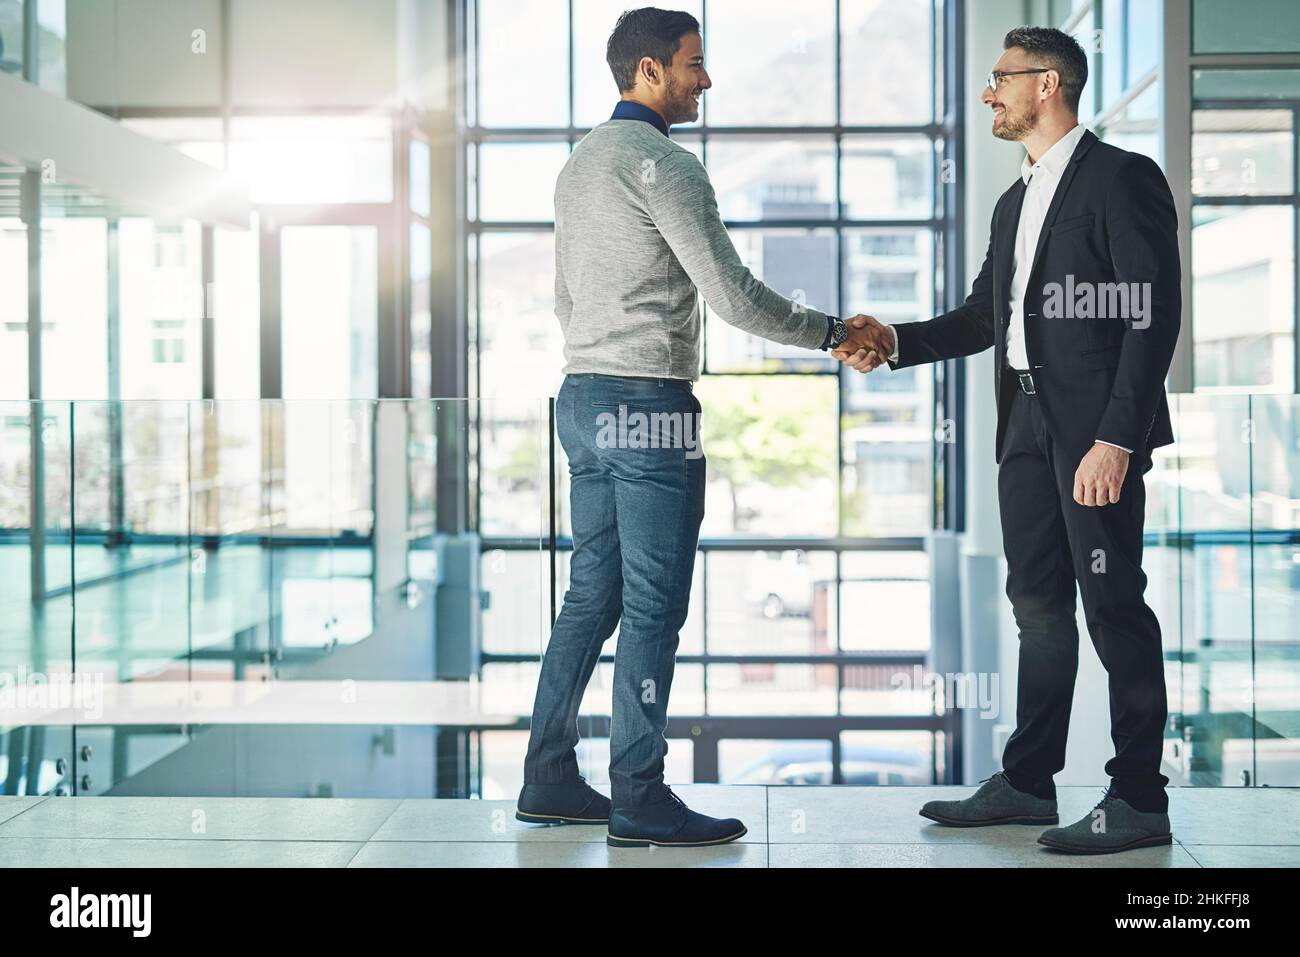 You deserve this promotion. Shot of two businessmen shaking hands together in an office. Stock Photo